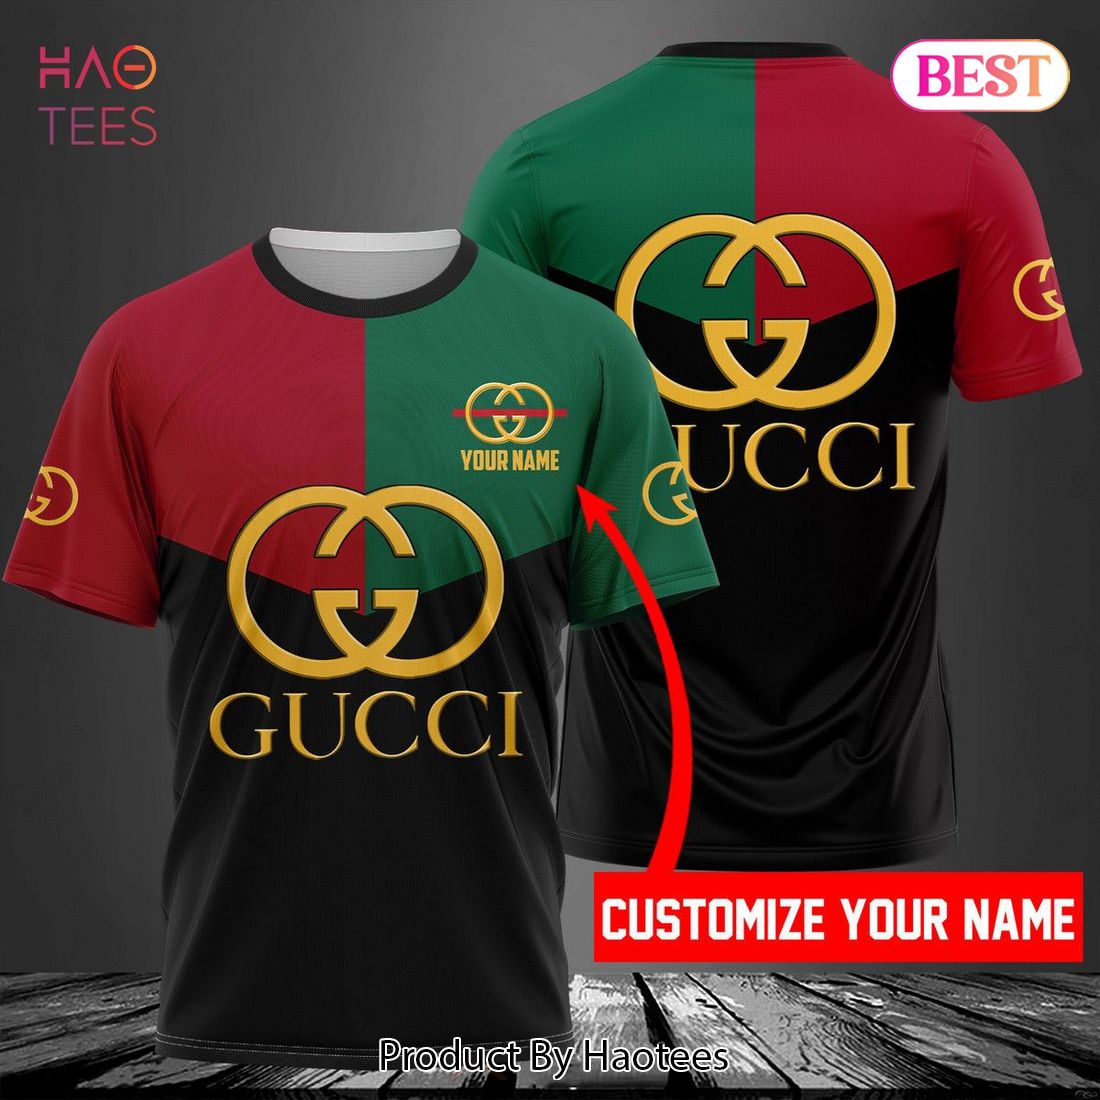 HOT Gucci Luxury Brand Customize Name 3D T-Shirt Mix Color Limited Edition